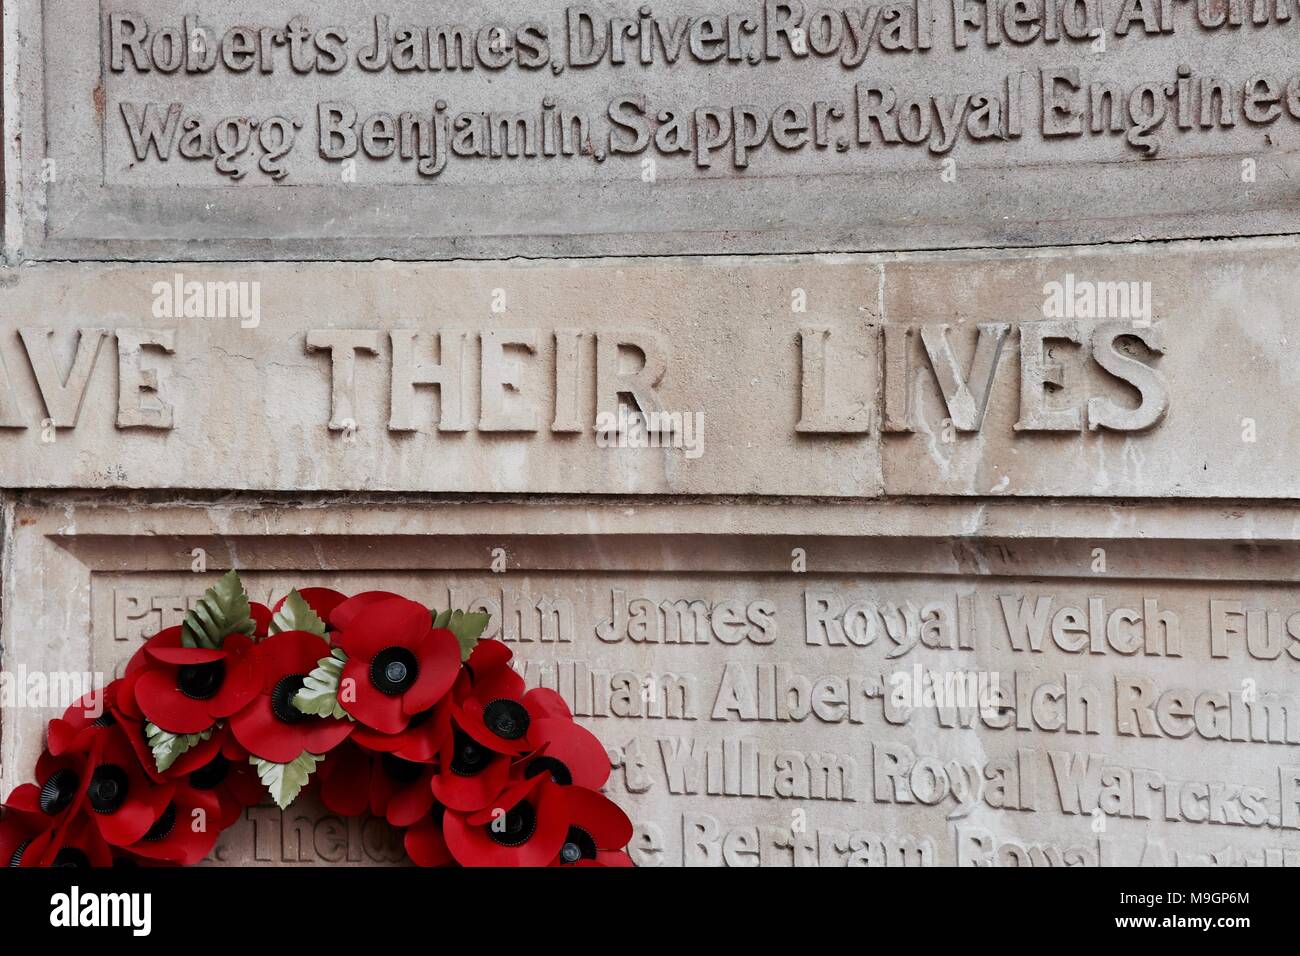 War memorial and poppy wreath, Wales Stock Photo